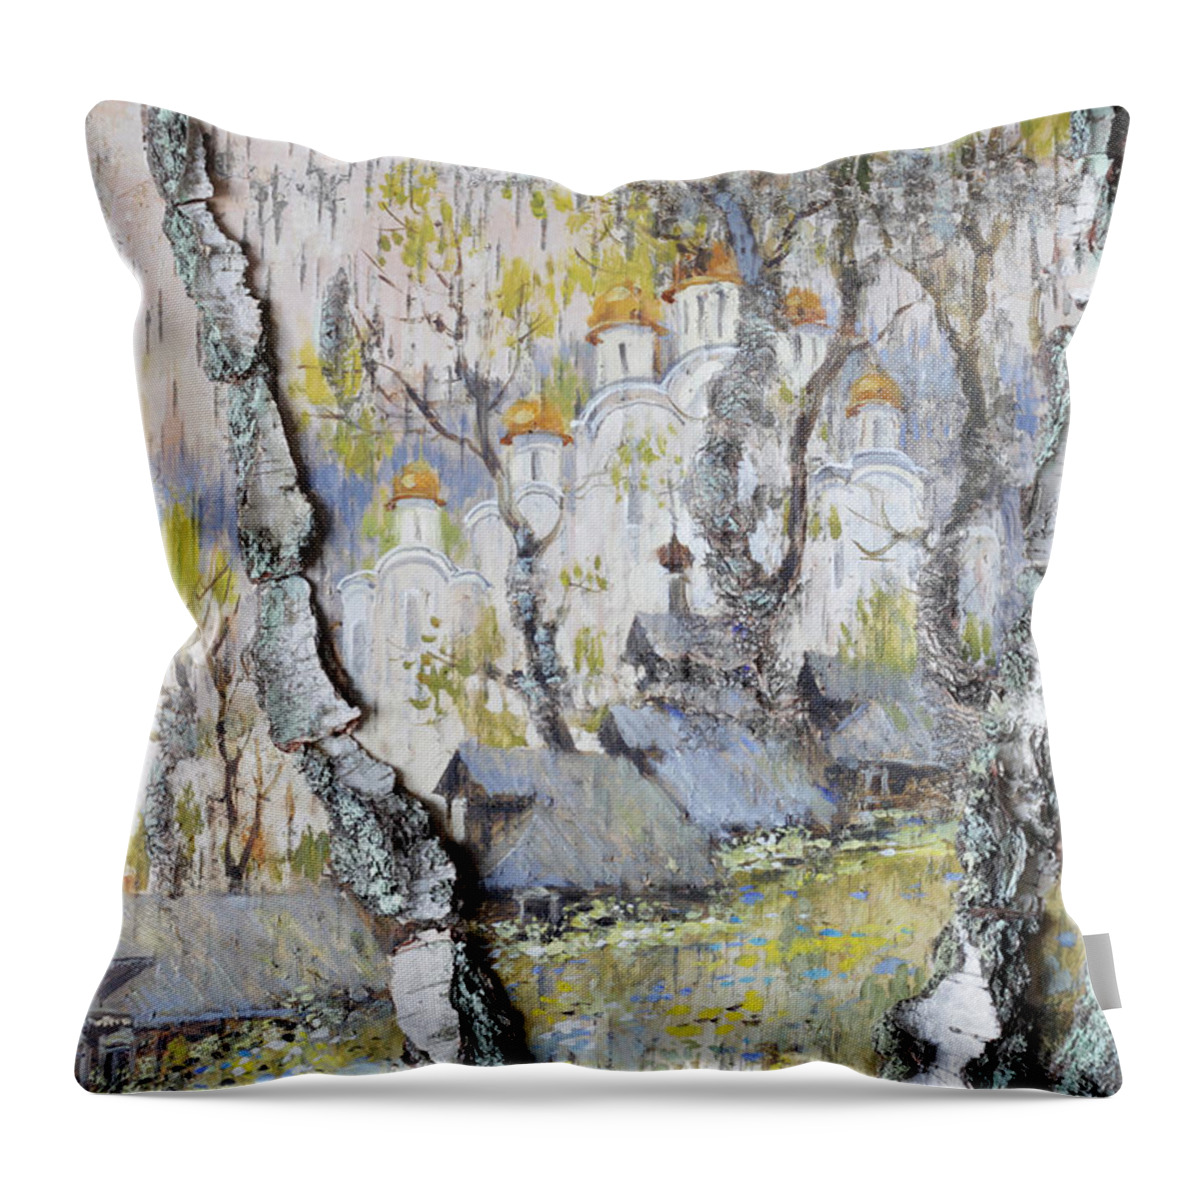 Russia Throw Pillow featuring the painting Soul of Russia by Ilya Kondrashov